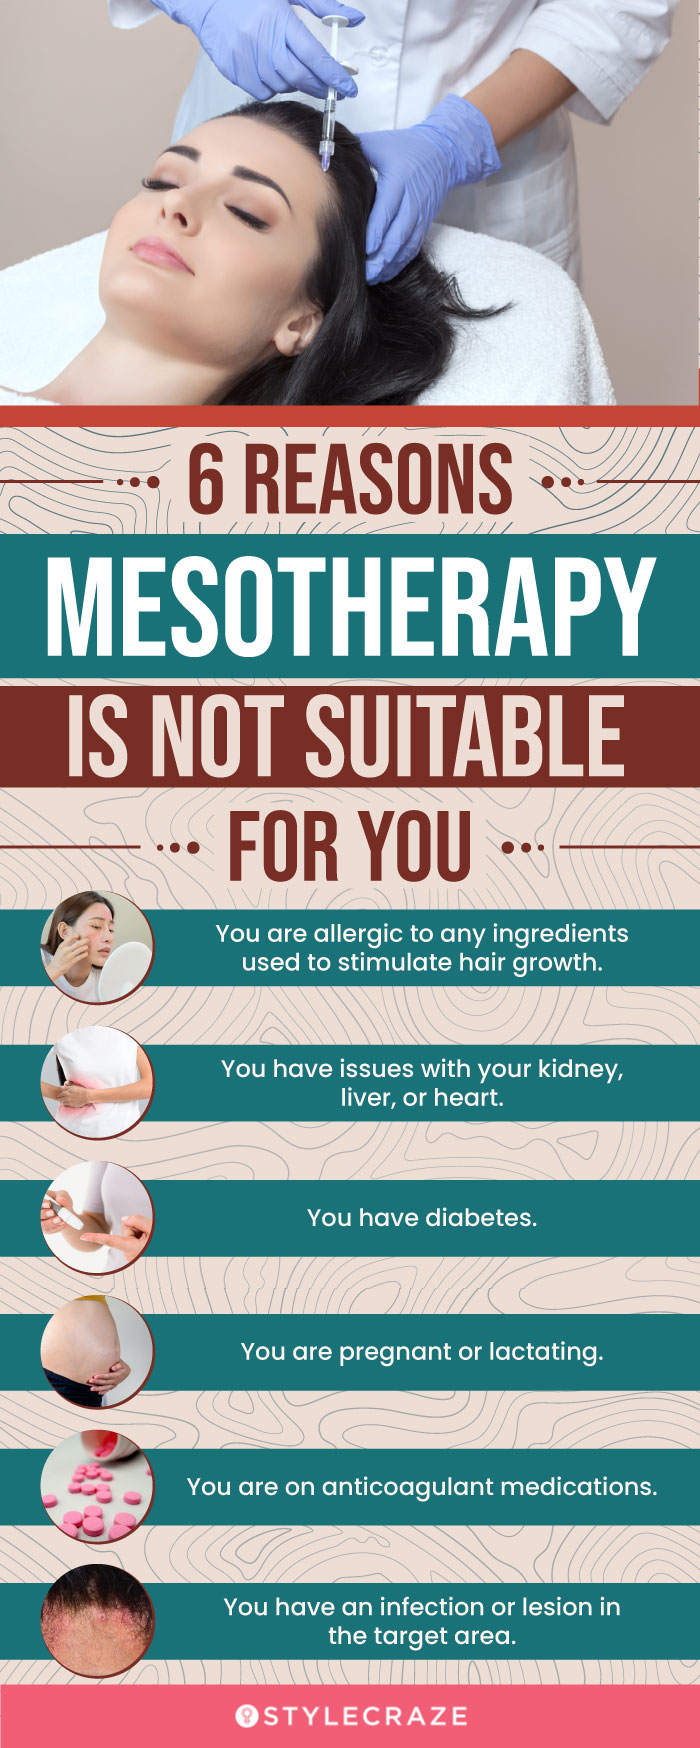 6 reasons mesotherapy is not suitable for you (infographic)